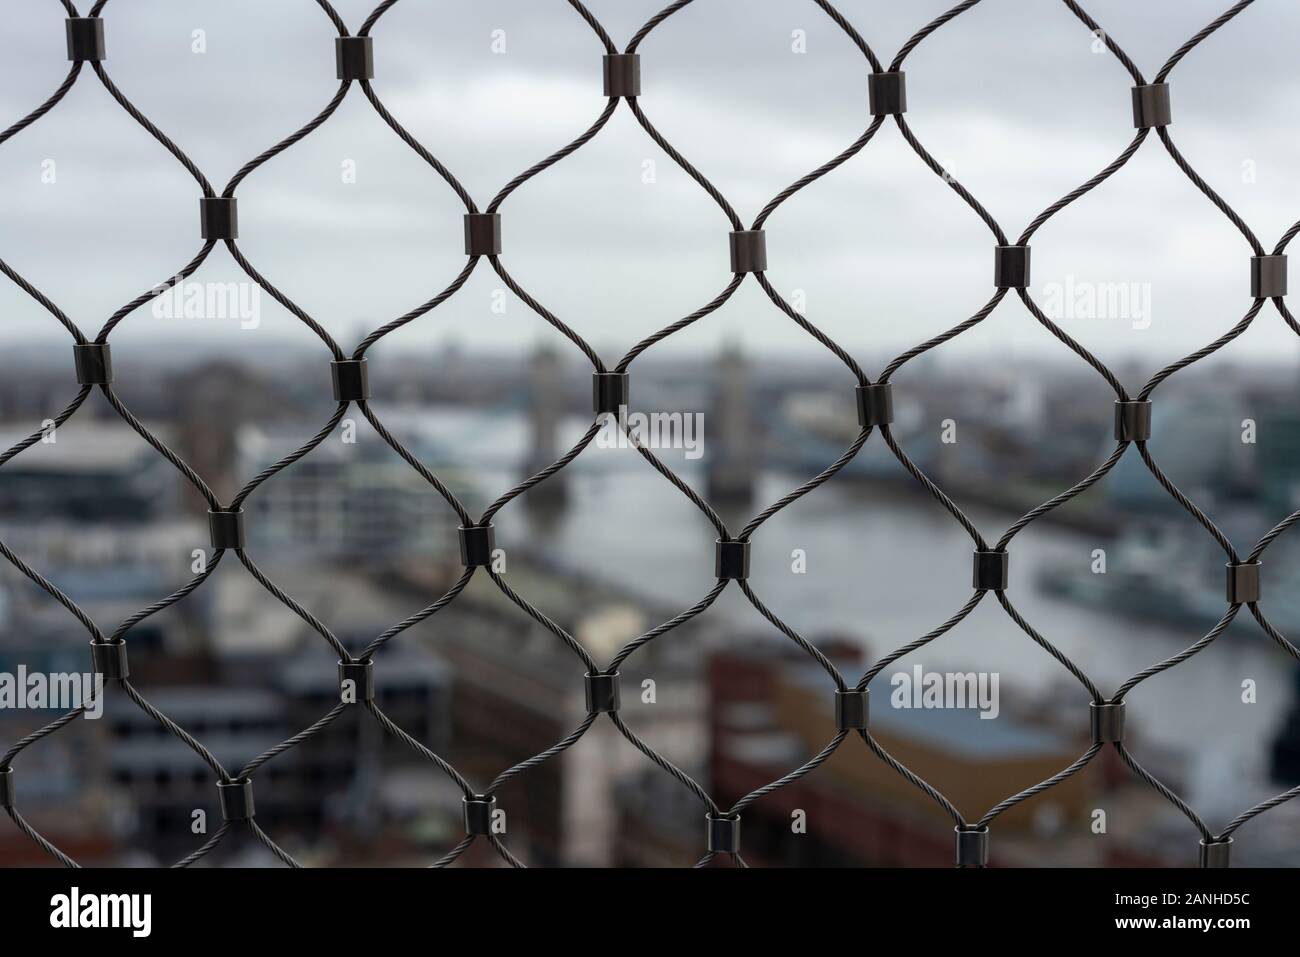 Tower Bridge London aerial 2020 as unusual defocused obstructed view through wire mesh fencing from the top of the Monument on dull cloudy day. Stock Photo